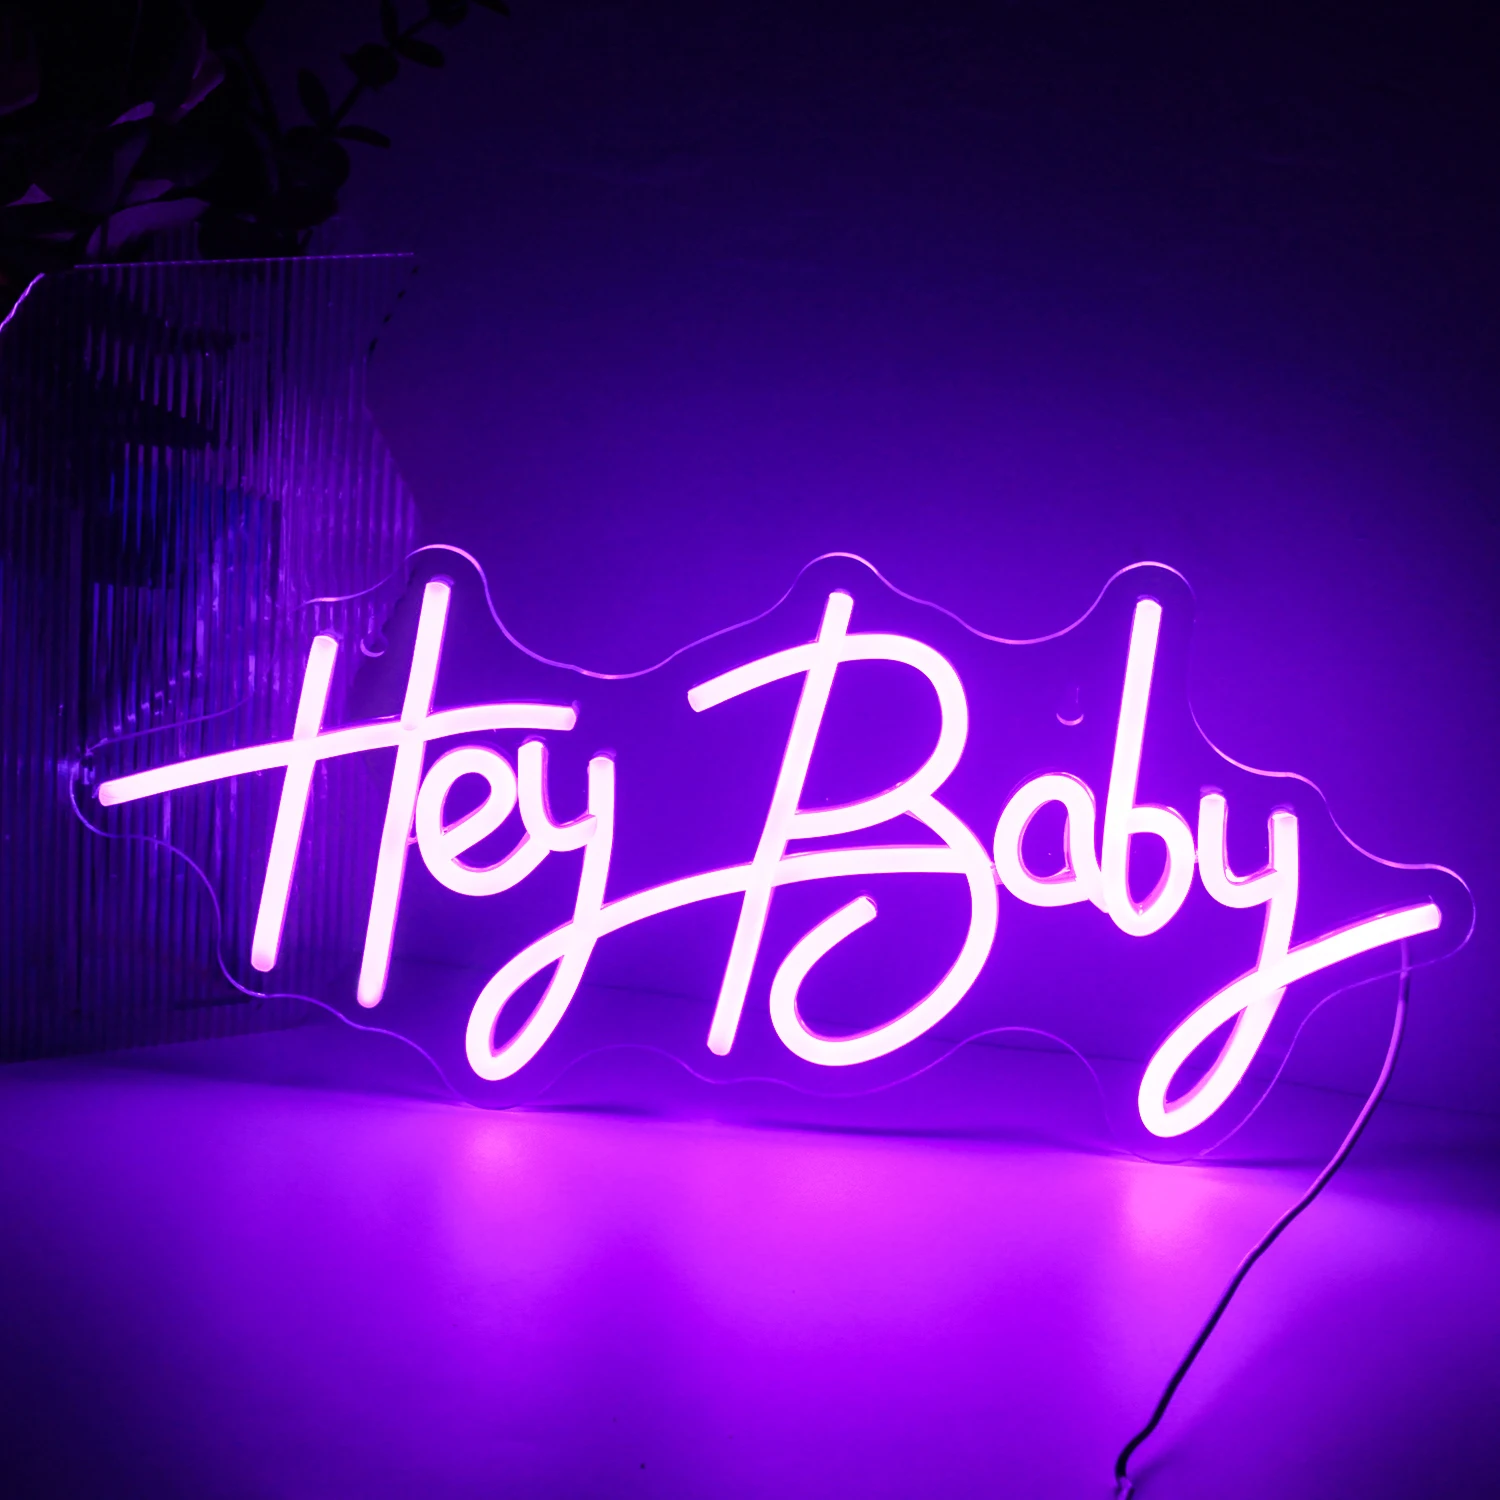 Ineonlife Neon Lights Hey Baby Sign LED Lamps Wedding Proposal Party ART Decorations Children Birthday Room Colour Lights led neon sign custom personalized design business signs room wall night lights birthday party wedding holiday decorations